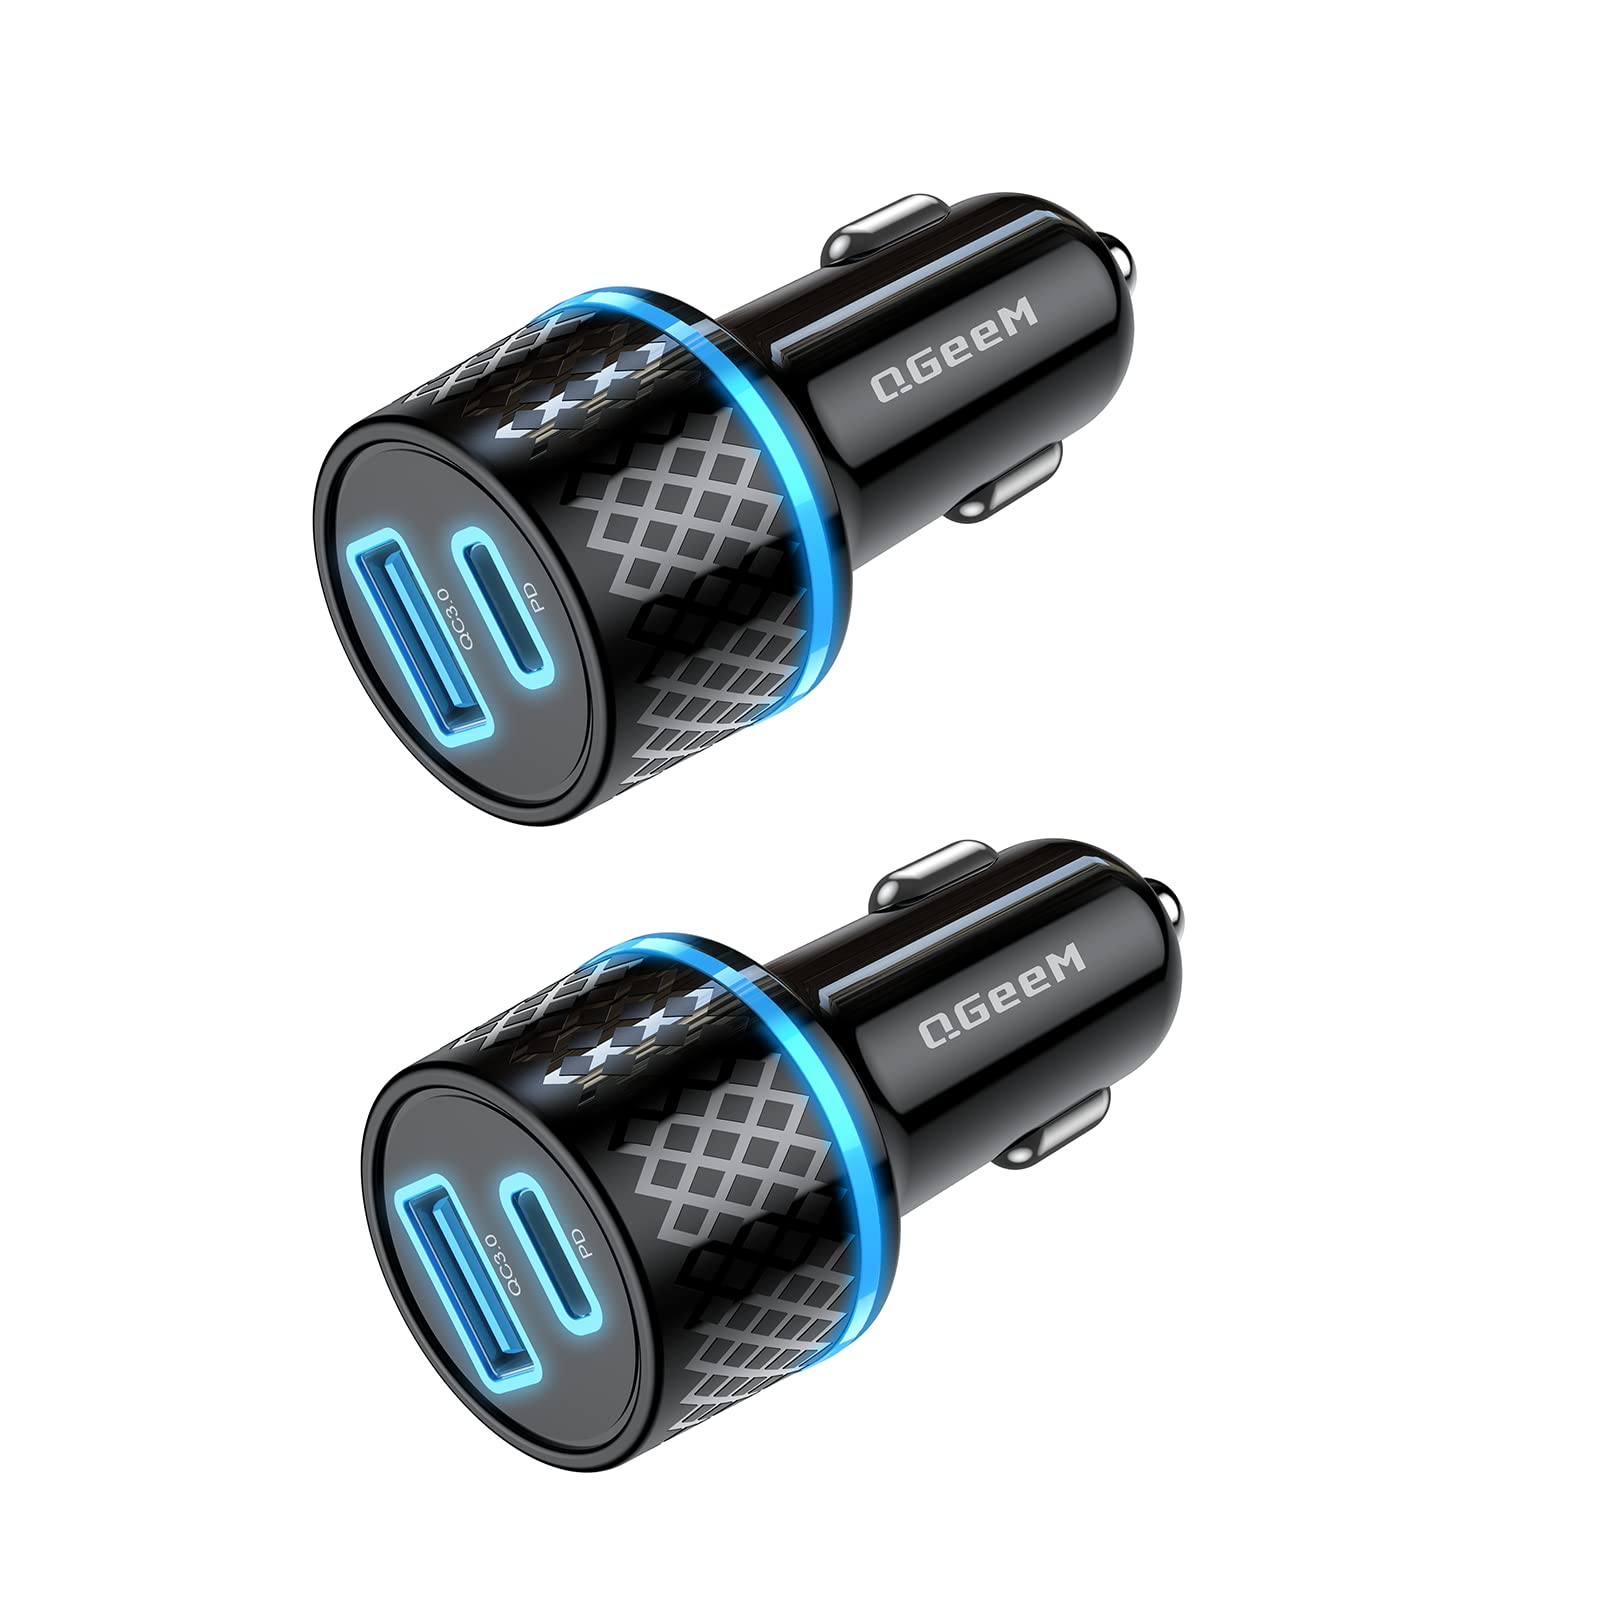 2-Pack QGeeM 42.5W Dual-Port PD & QC 3.0 Car Charger w/ LED Light (Black or White) $7.99 + Free Shipping w/ Prime or on $25+